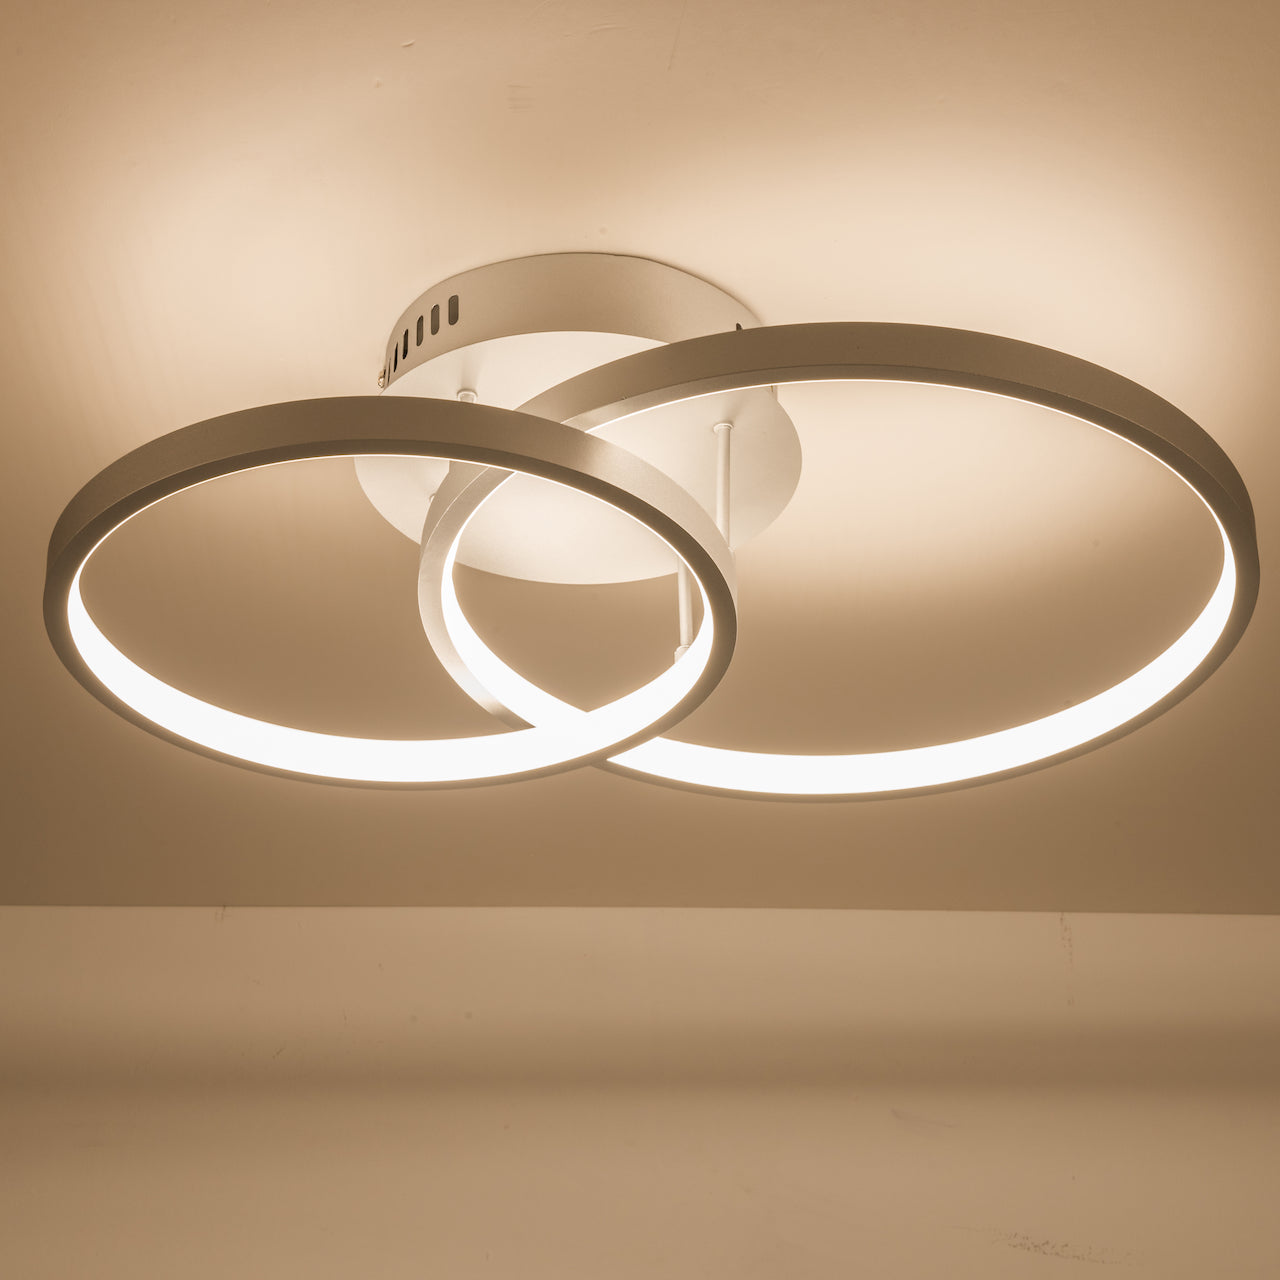 LED Ceiling Light, Double Halo Shaped, Silver Finish Dimmable, Warm White 3000K